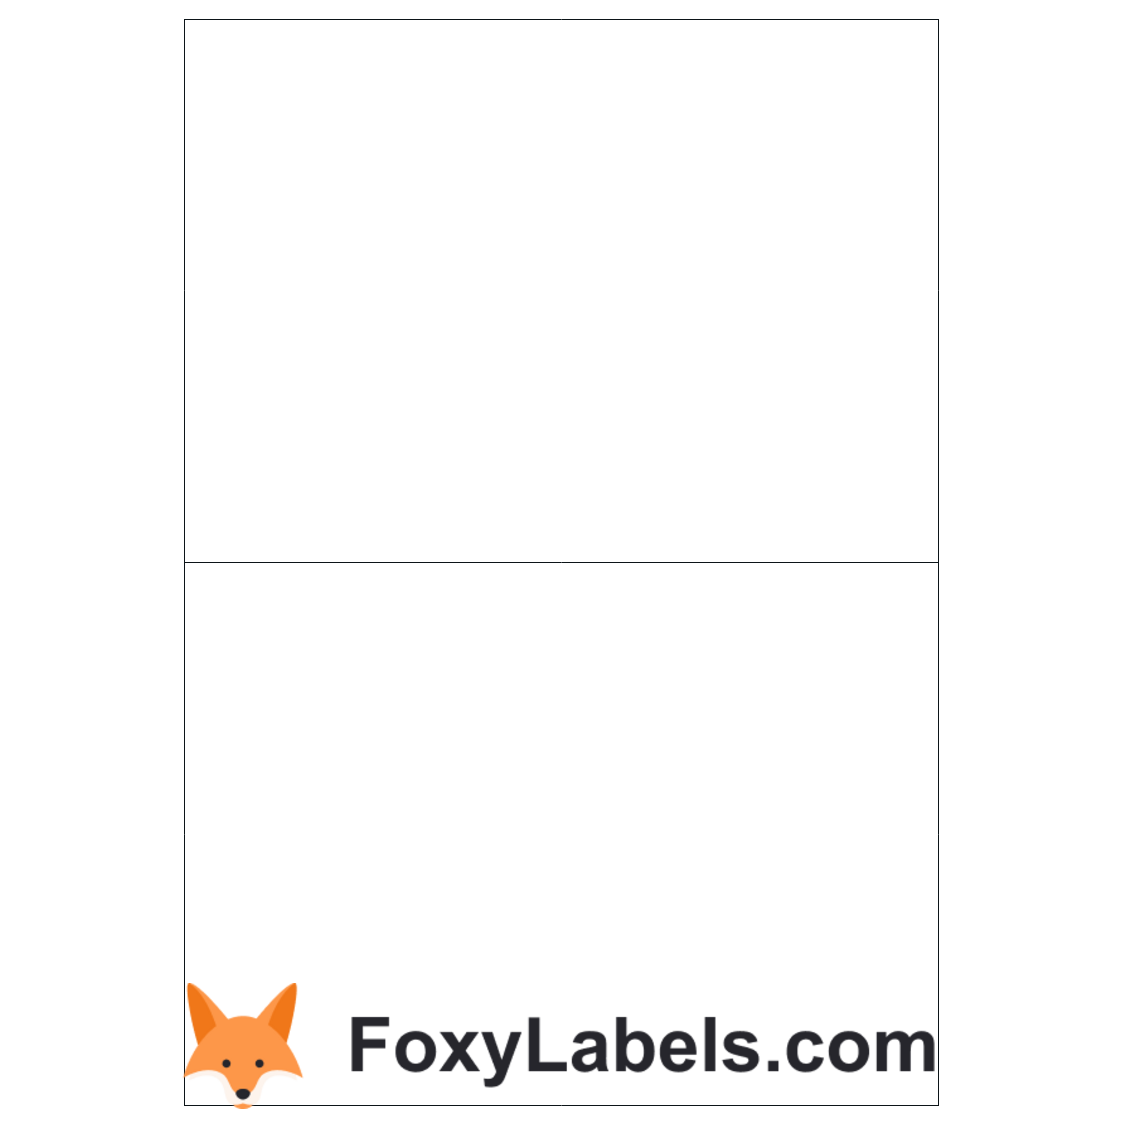 Avery L7068 label template for Google Docs